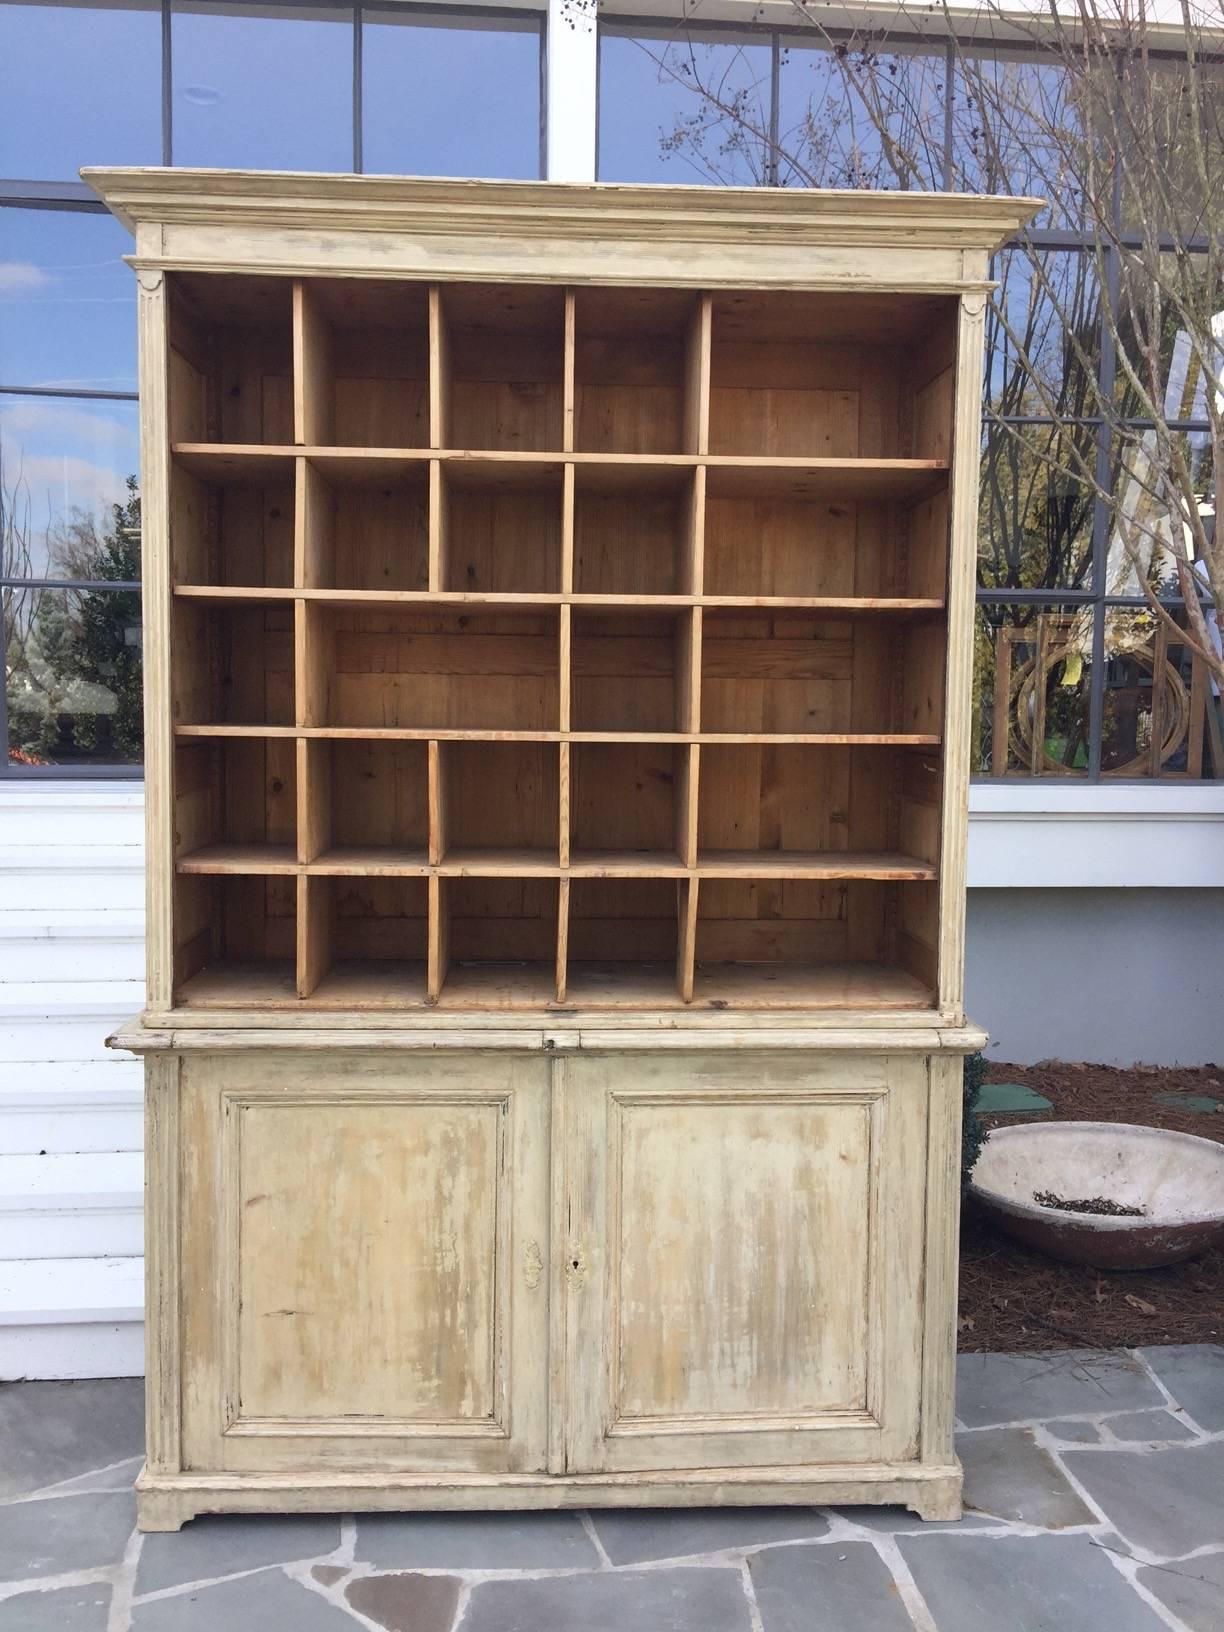 19th century French cabinet with pull out boards. This piece is in two parts and likely originated as a shop piece. The pullout boards were used to stack and sort inventory. The paint has been scarped to its original patina and it has lovely reeded